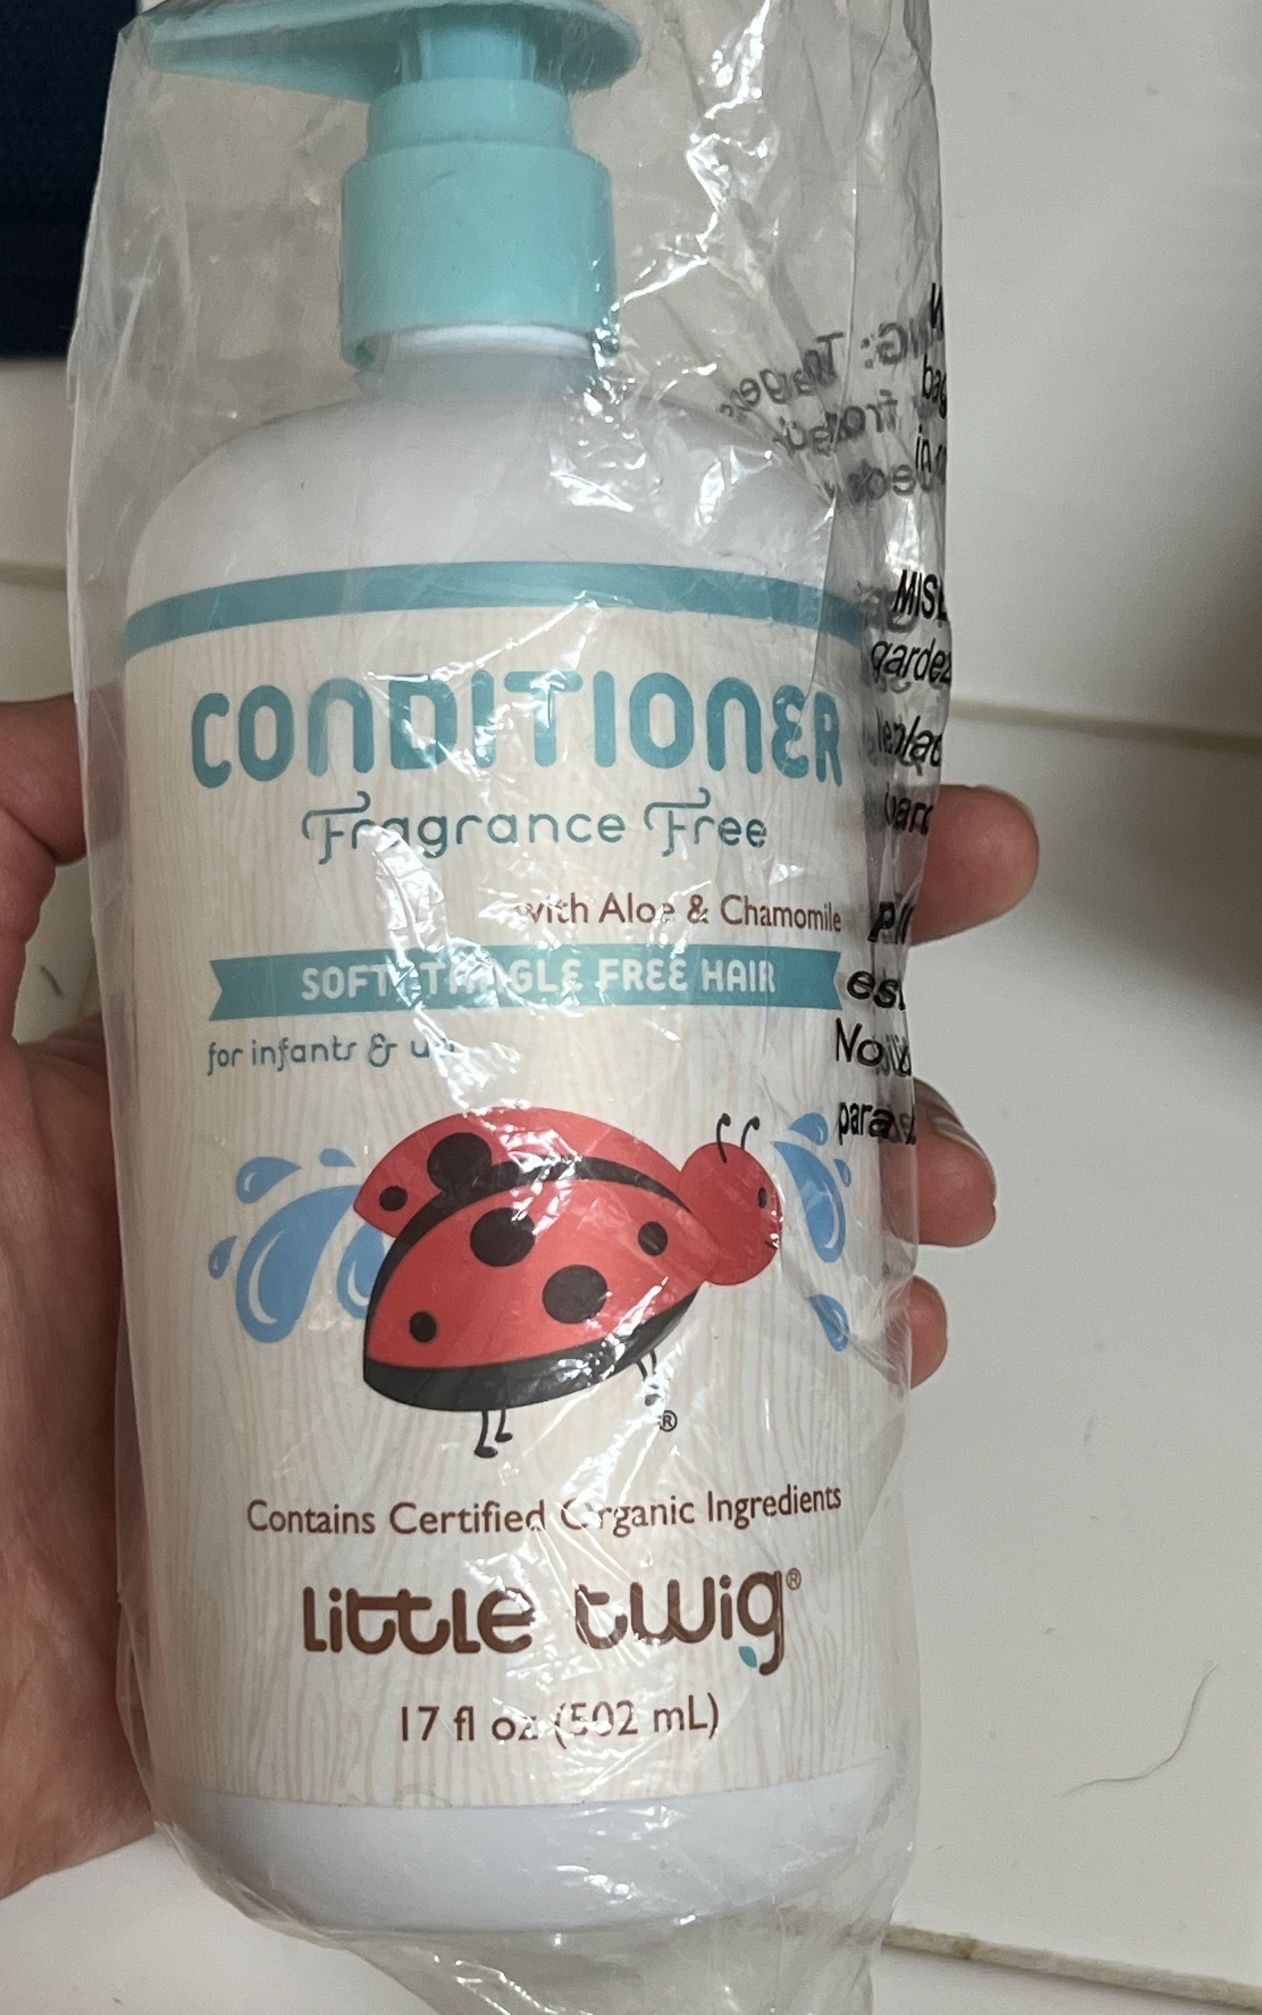 Little Twig Fragrance Free Conditioner 02/27